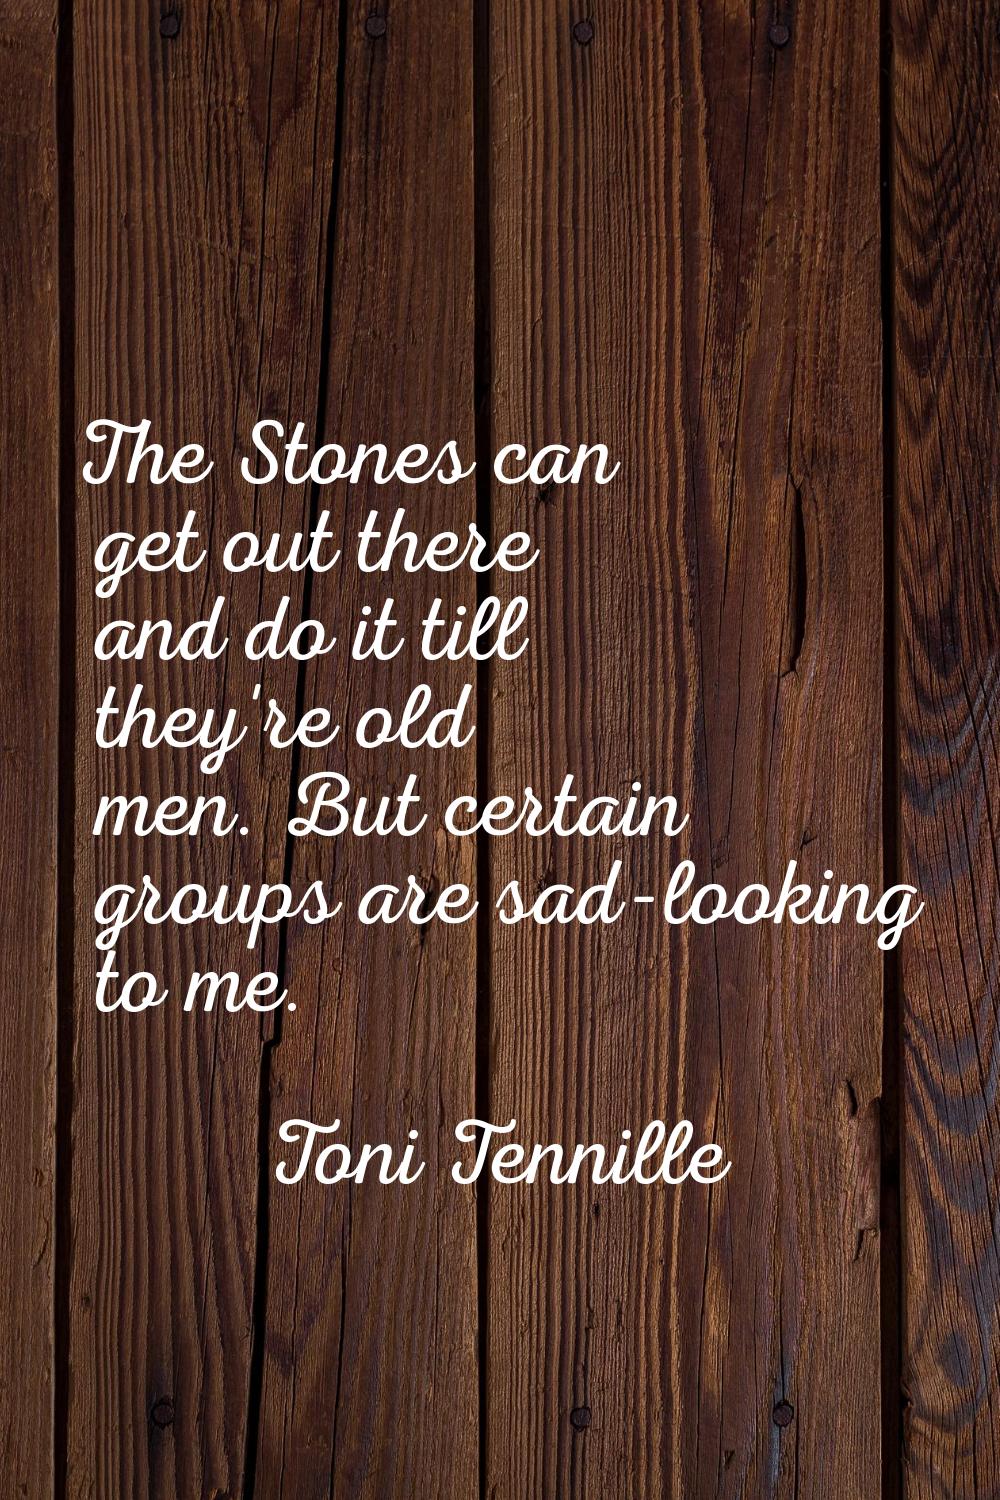 The Stones can get out there and do it till they're old men. But certain groups are sad-looking to 